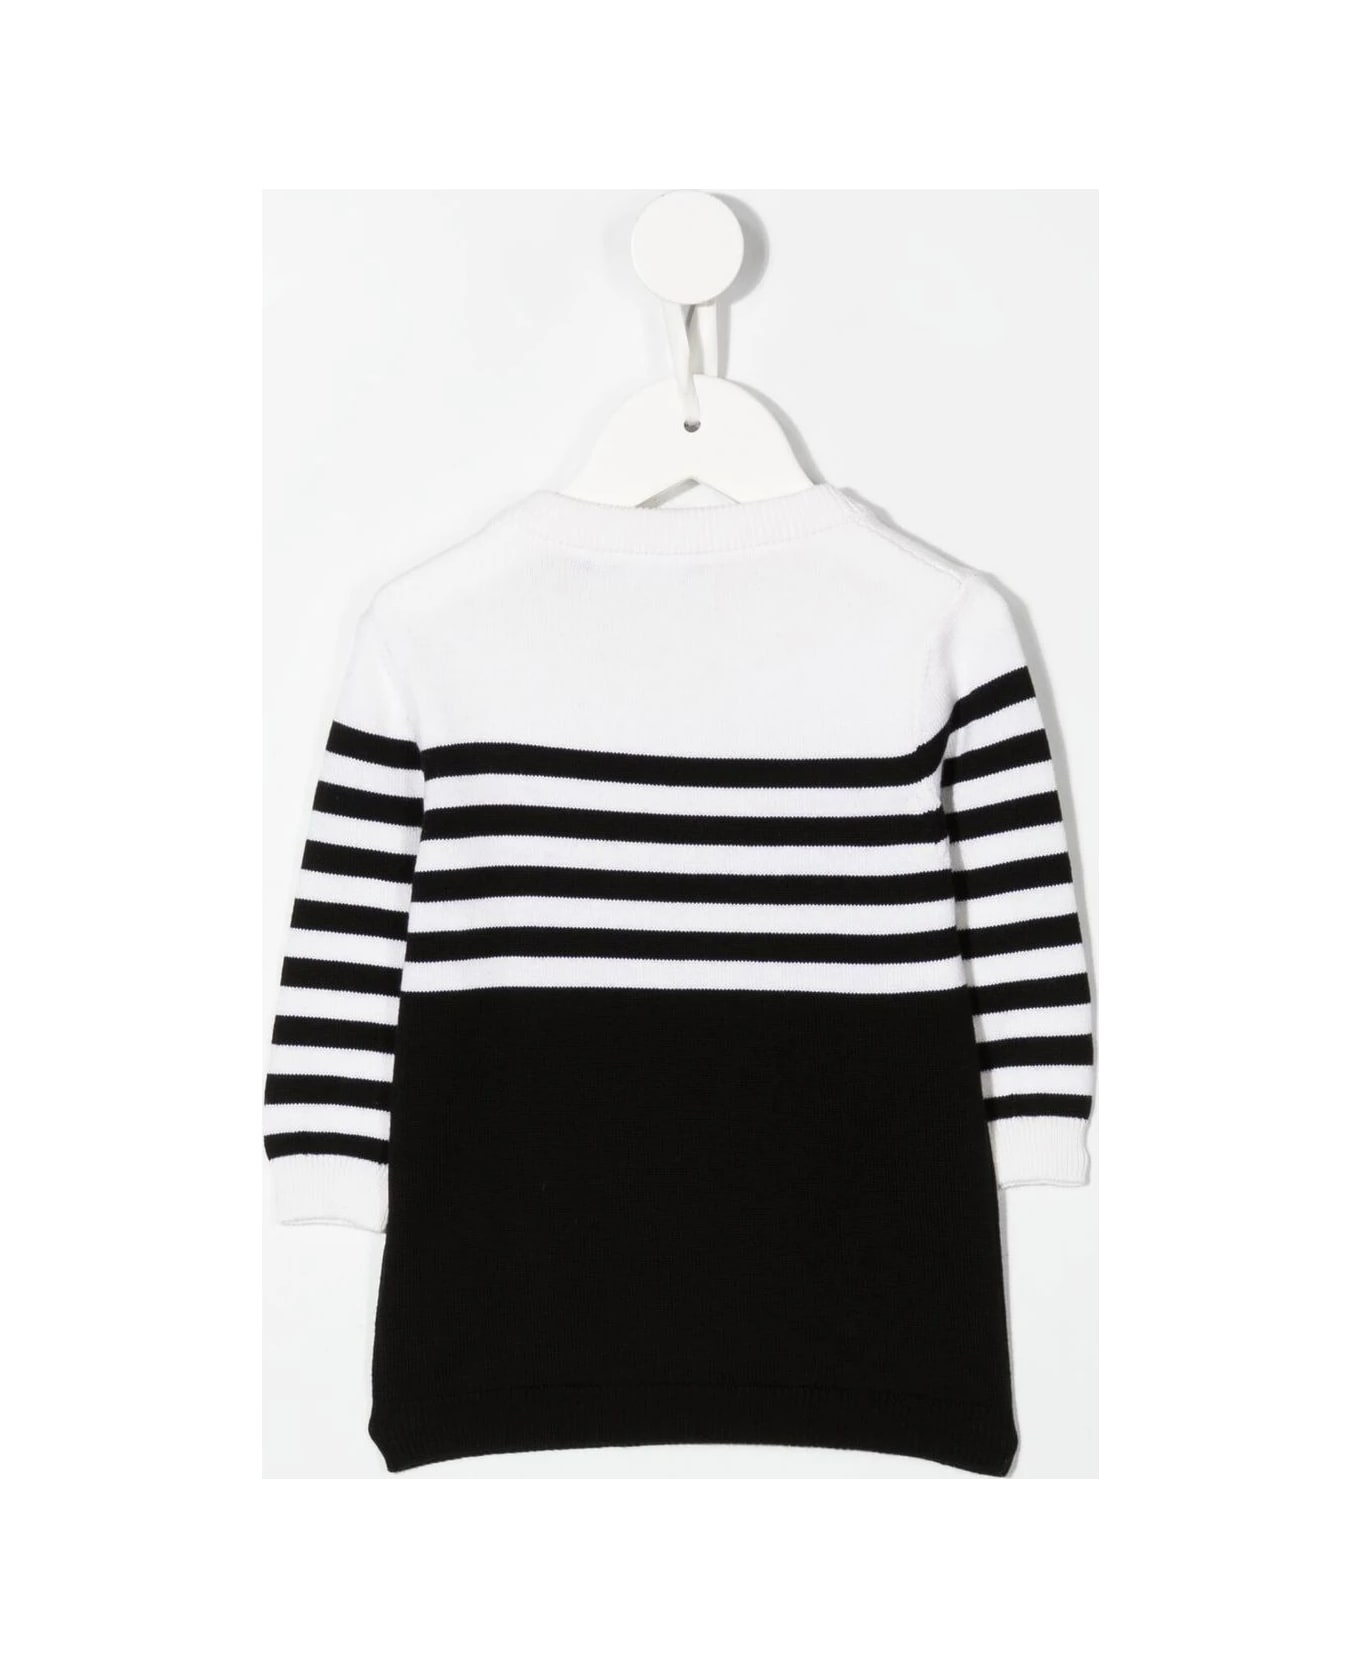 Balmain Baby Dress In White And Black Knit With Logo And Striped Pattern - Nero/bianco